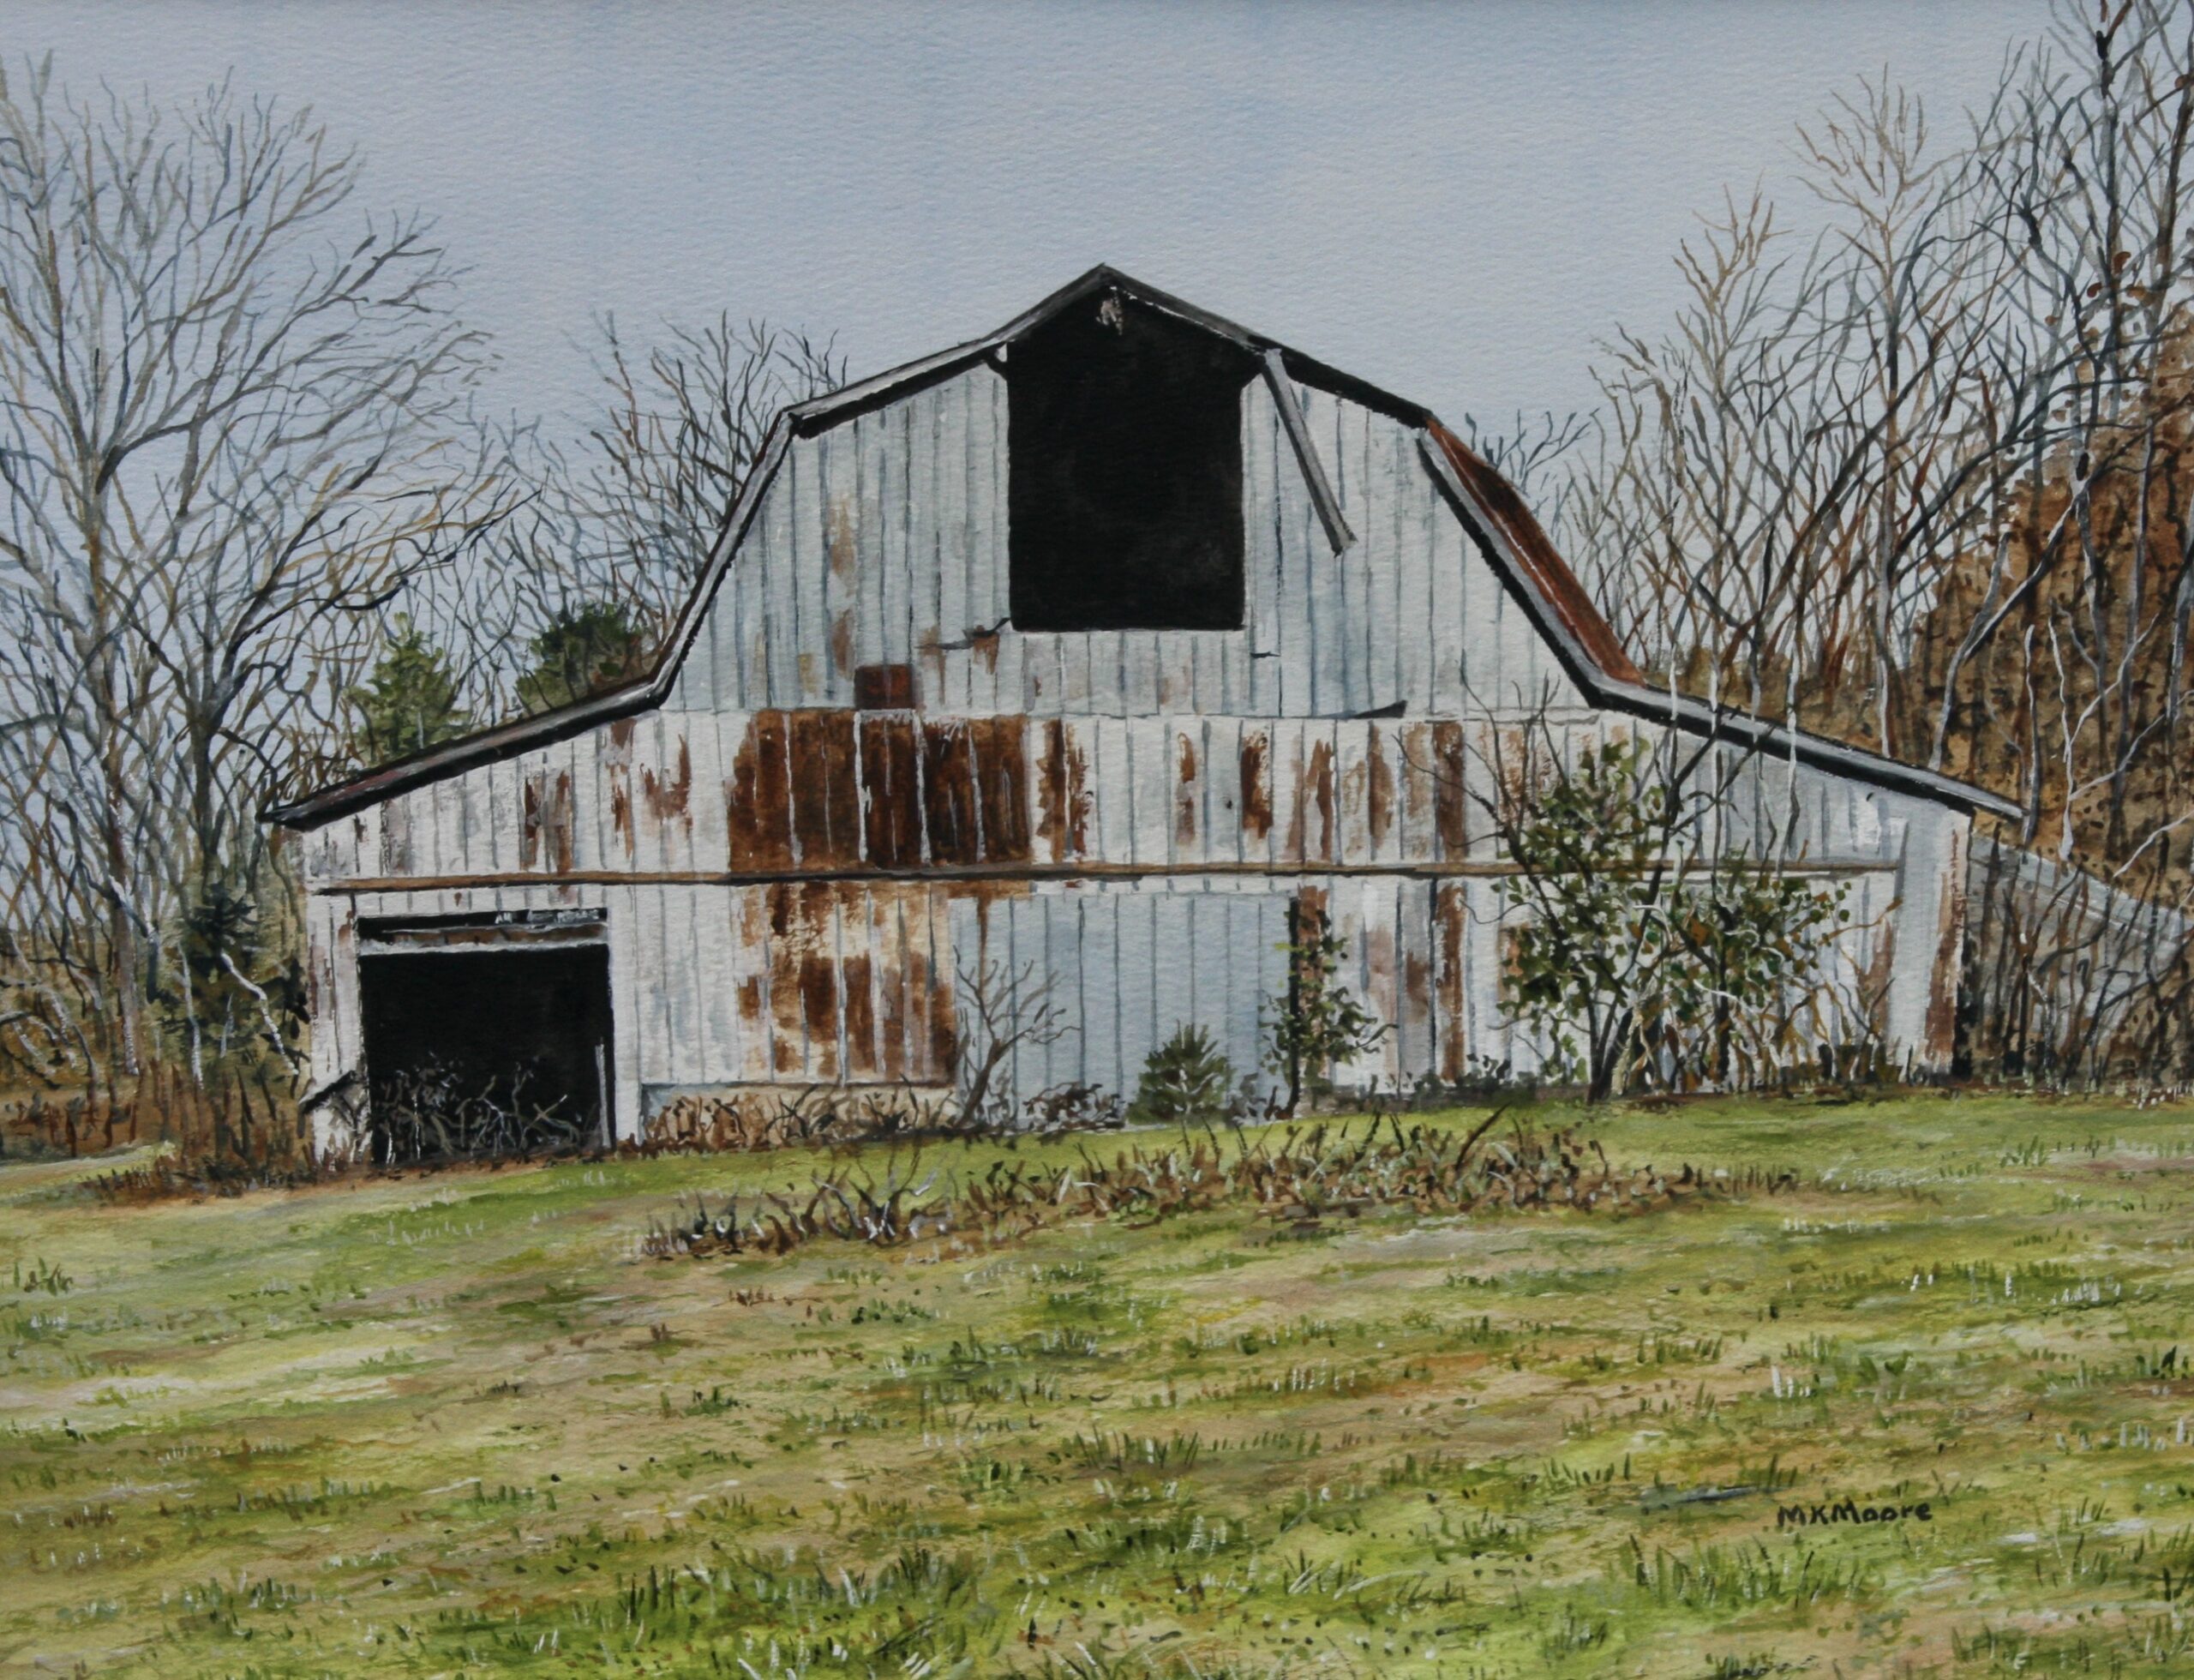 watercolor painting by Martha K. Moore of a deteriorating, rusty metal barn